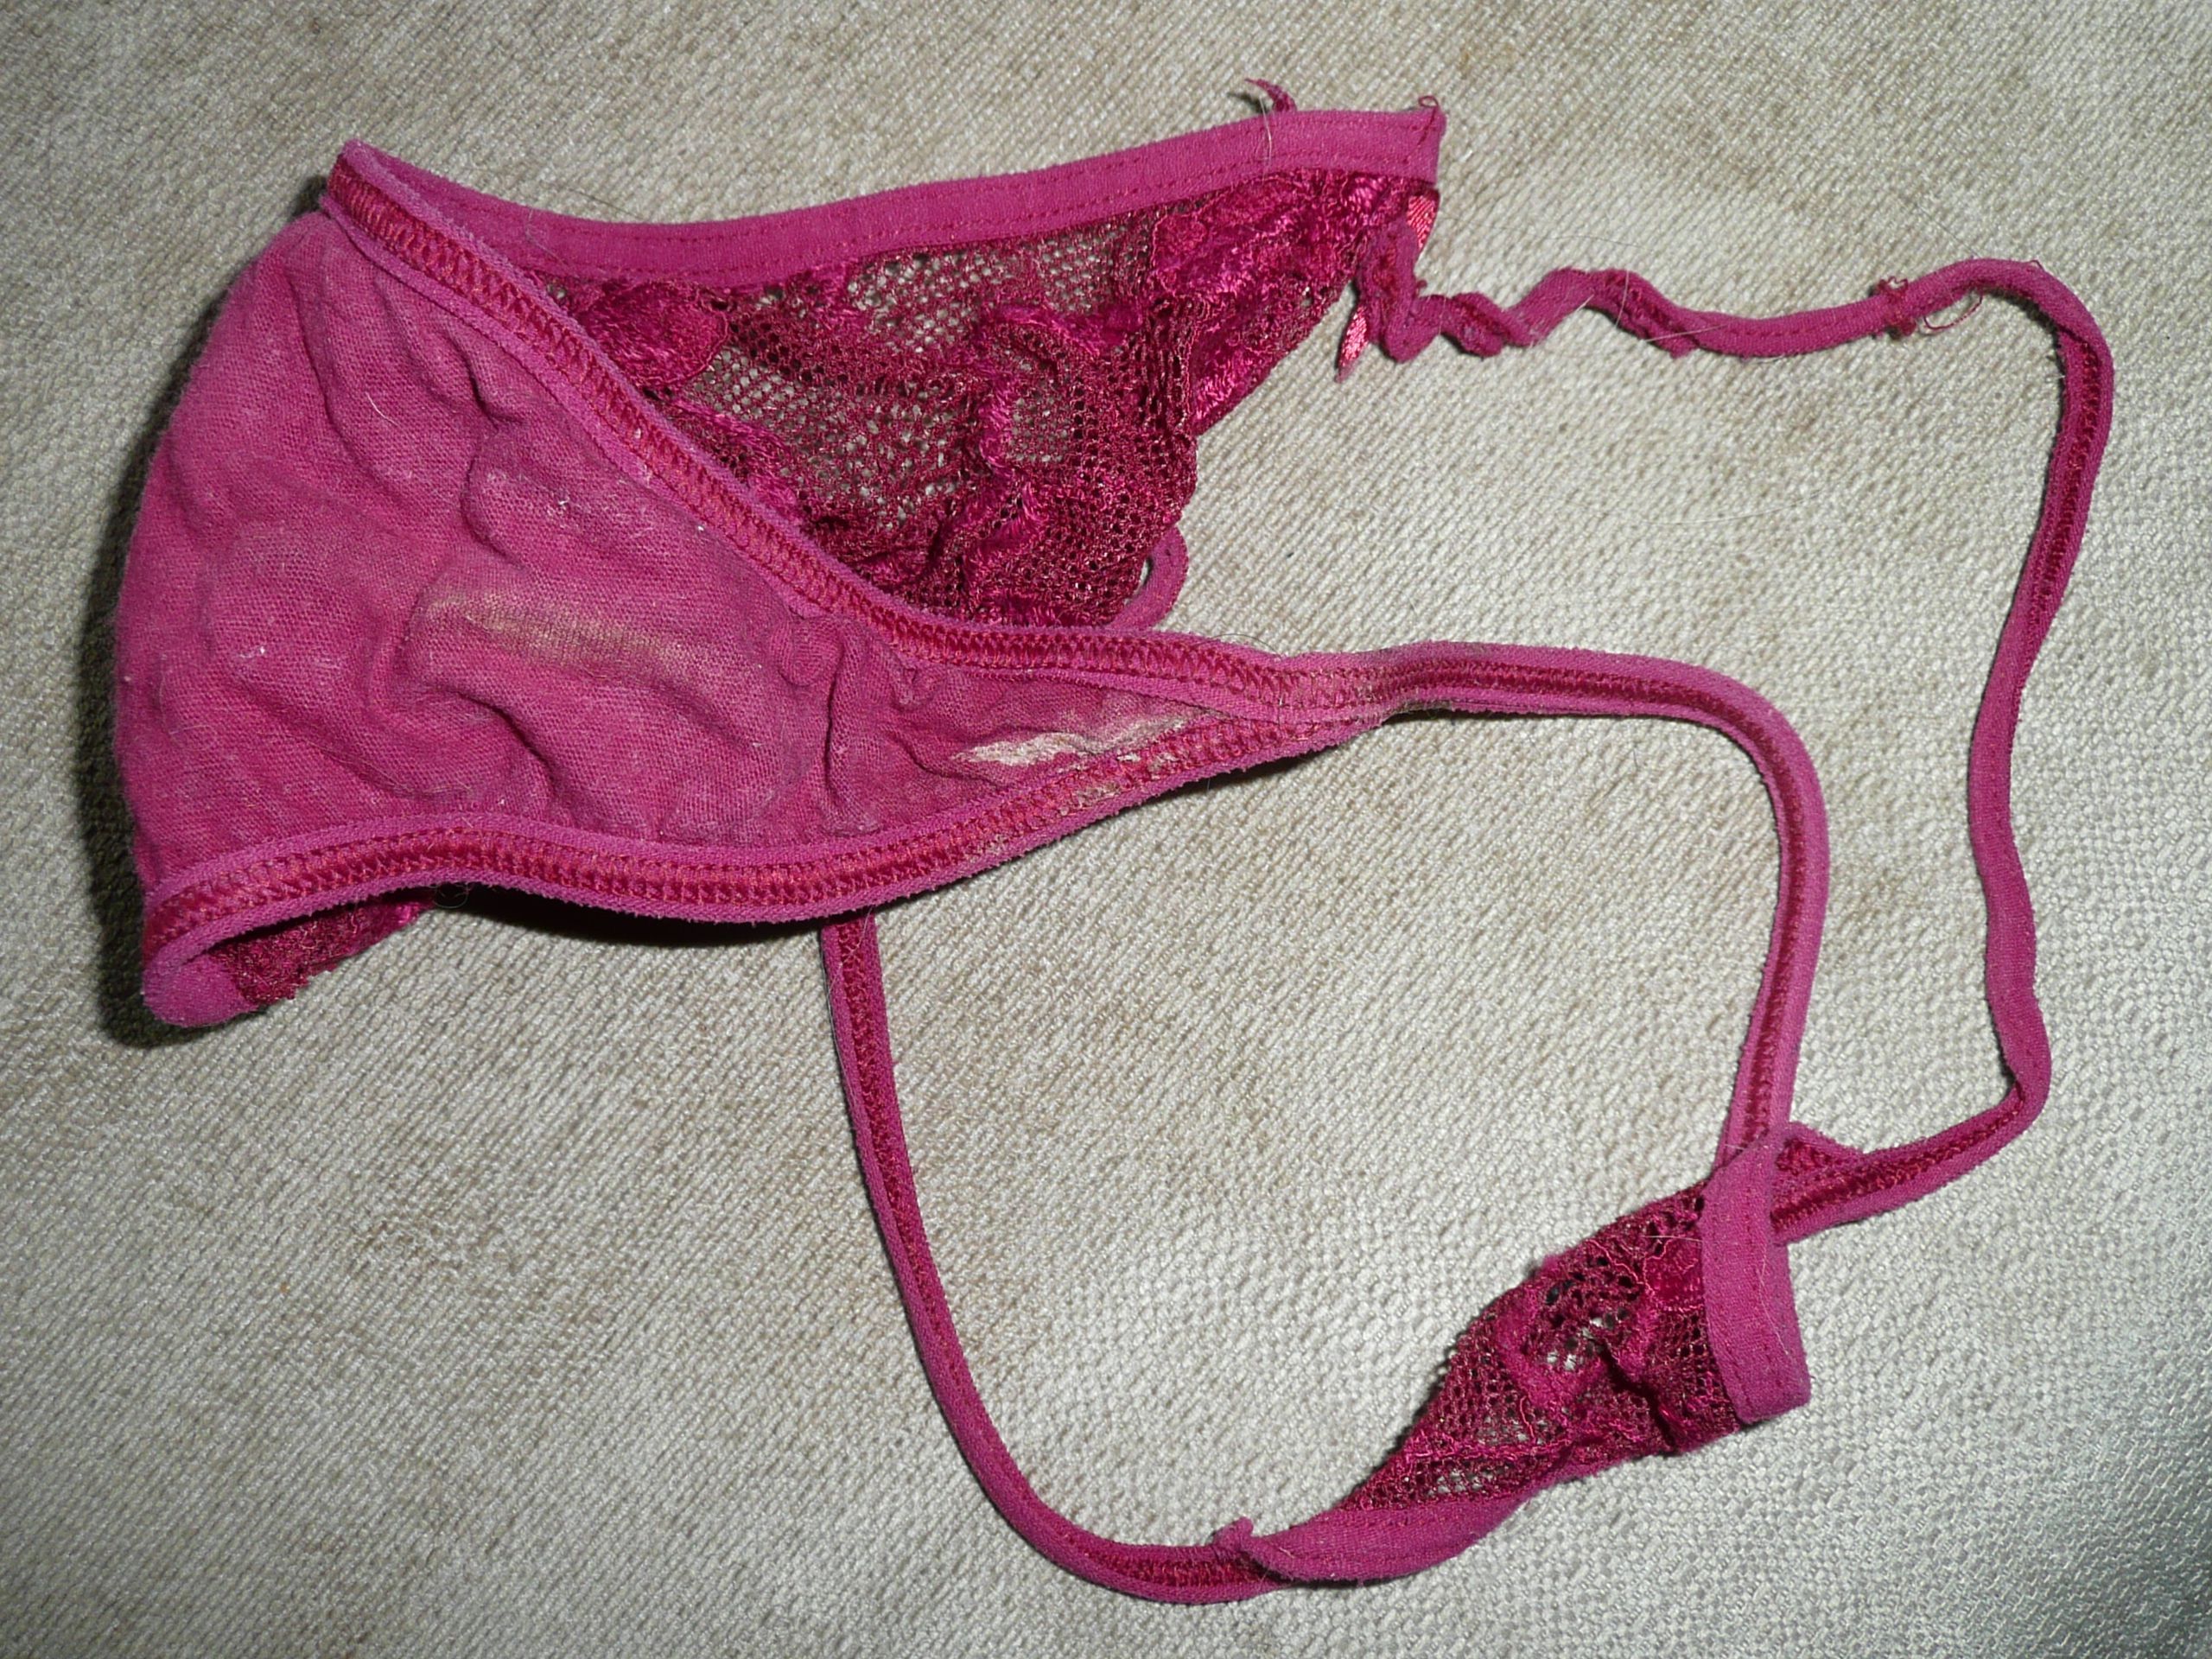 Finch recomended panties dirty used